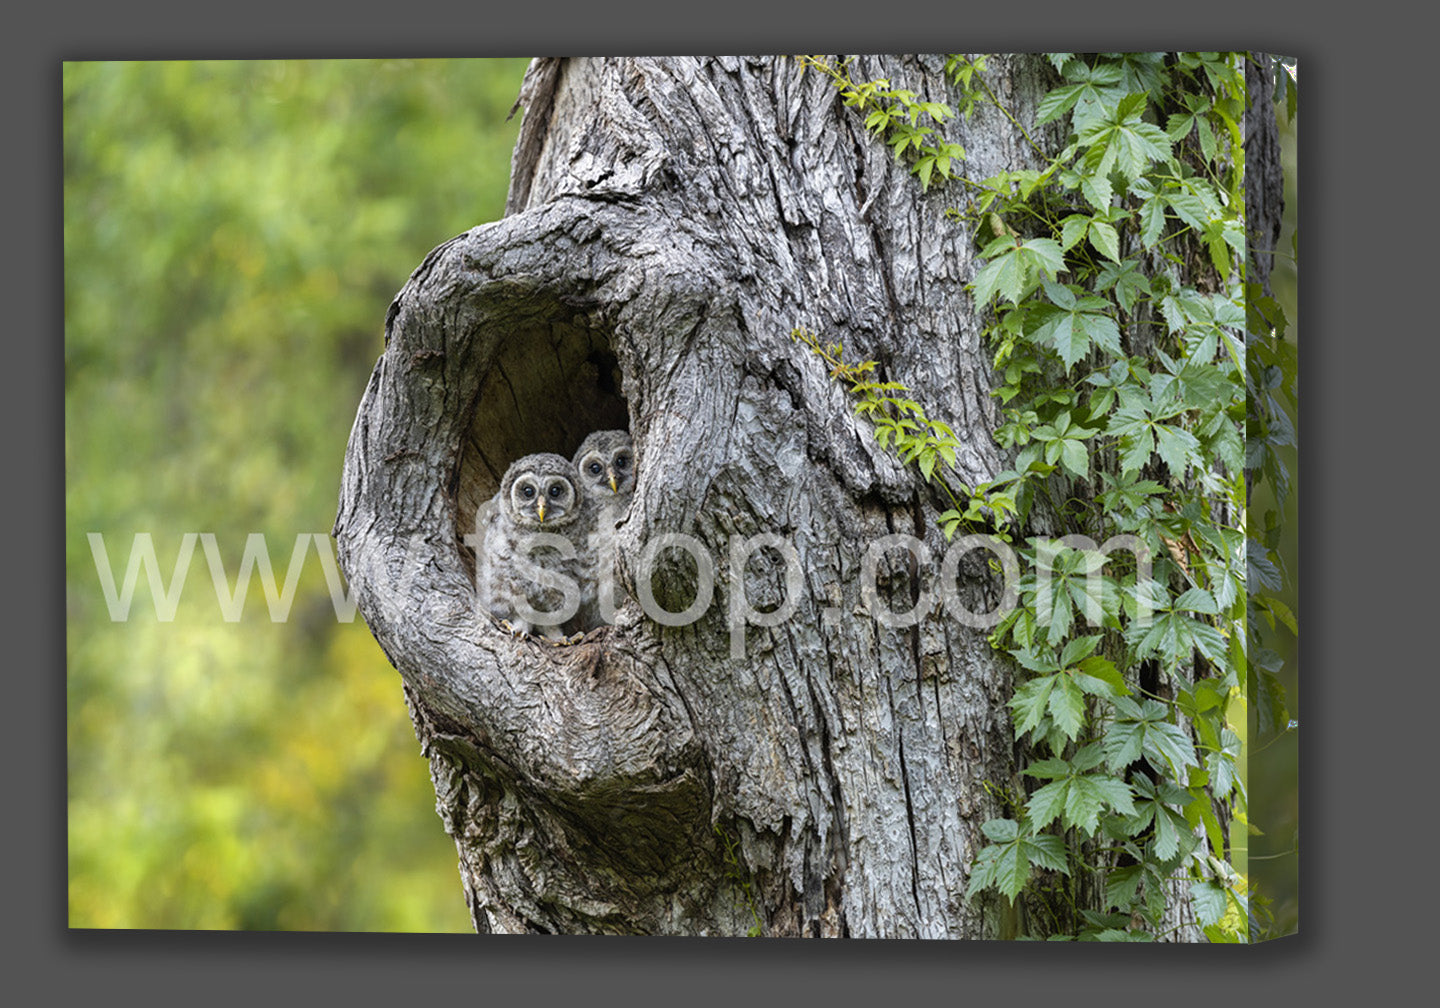 Eyes Tell the Story (Canvas Print) - WATERMARKS will not appear on finished products